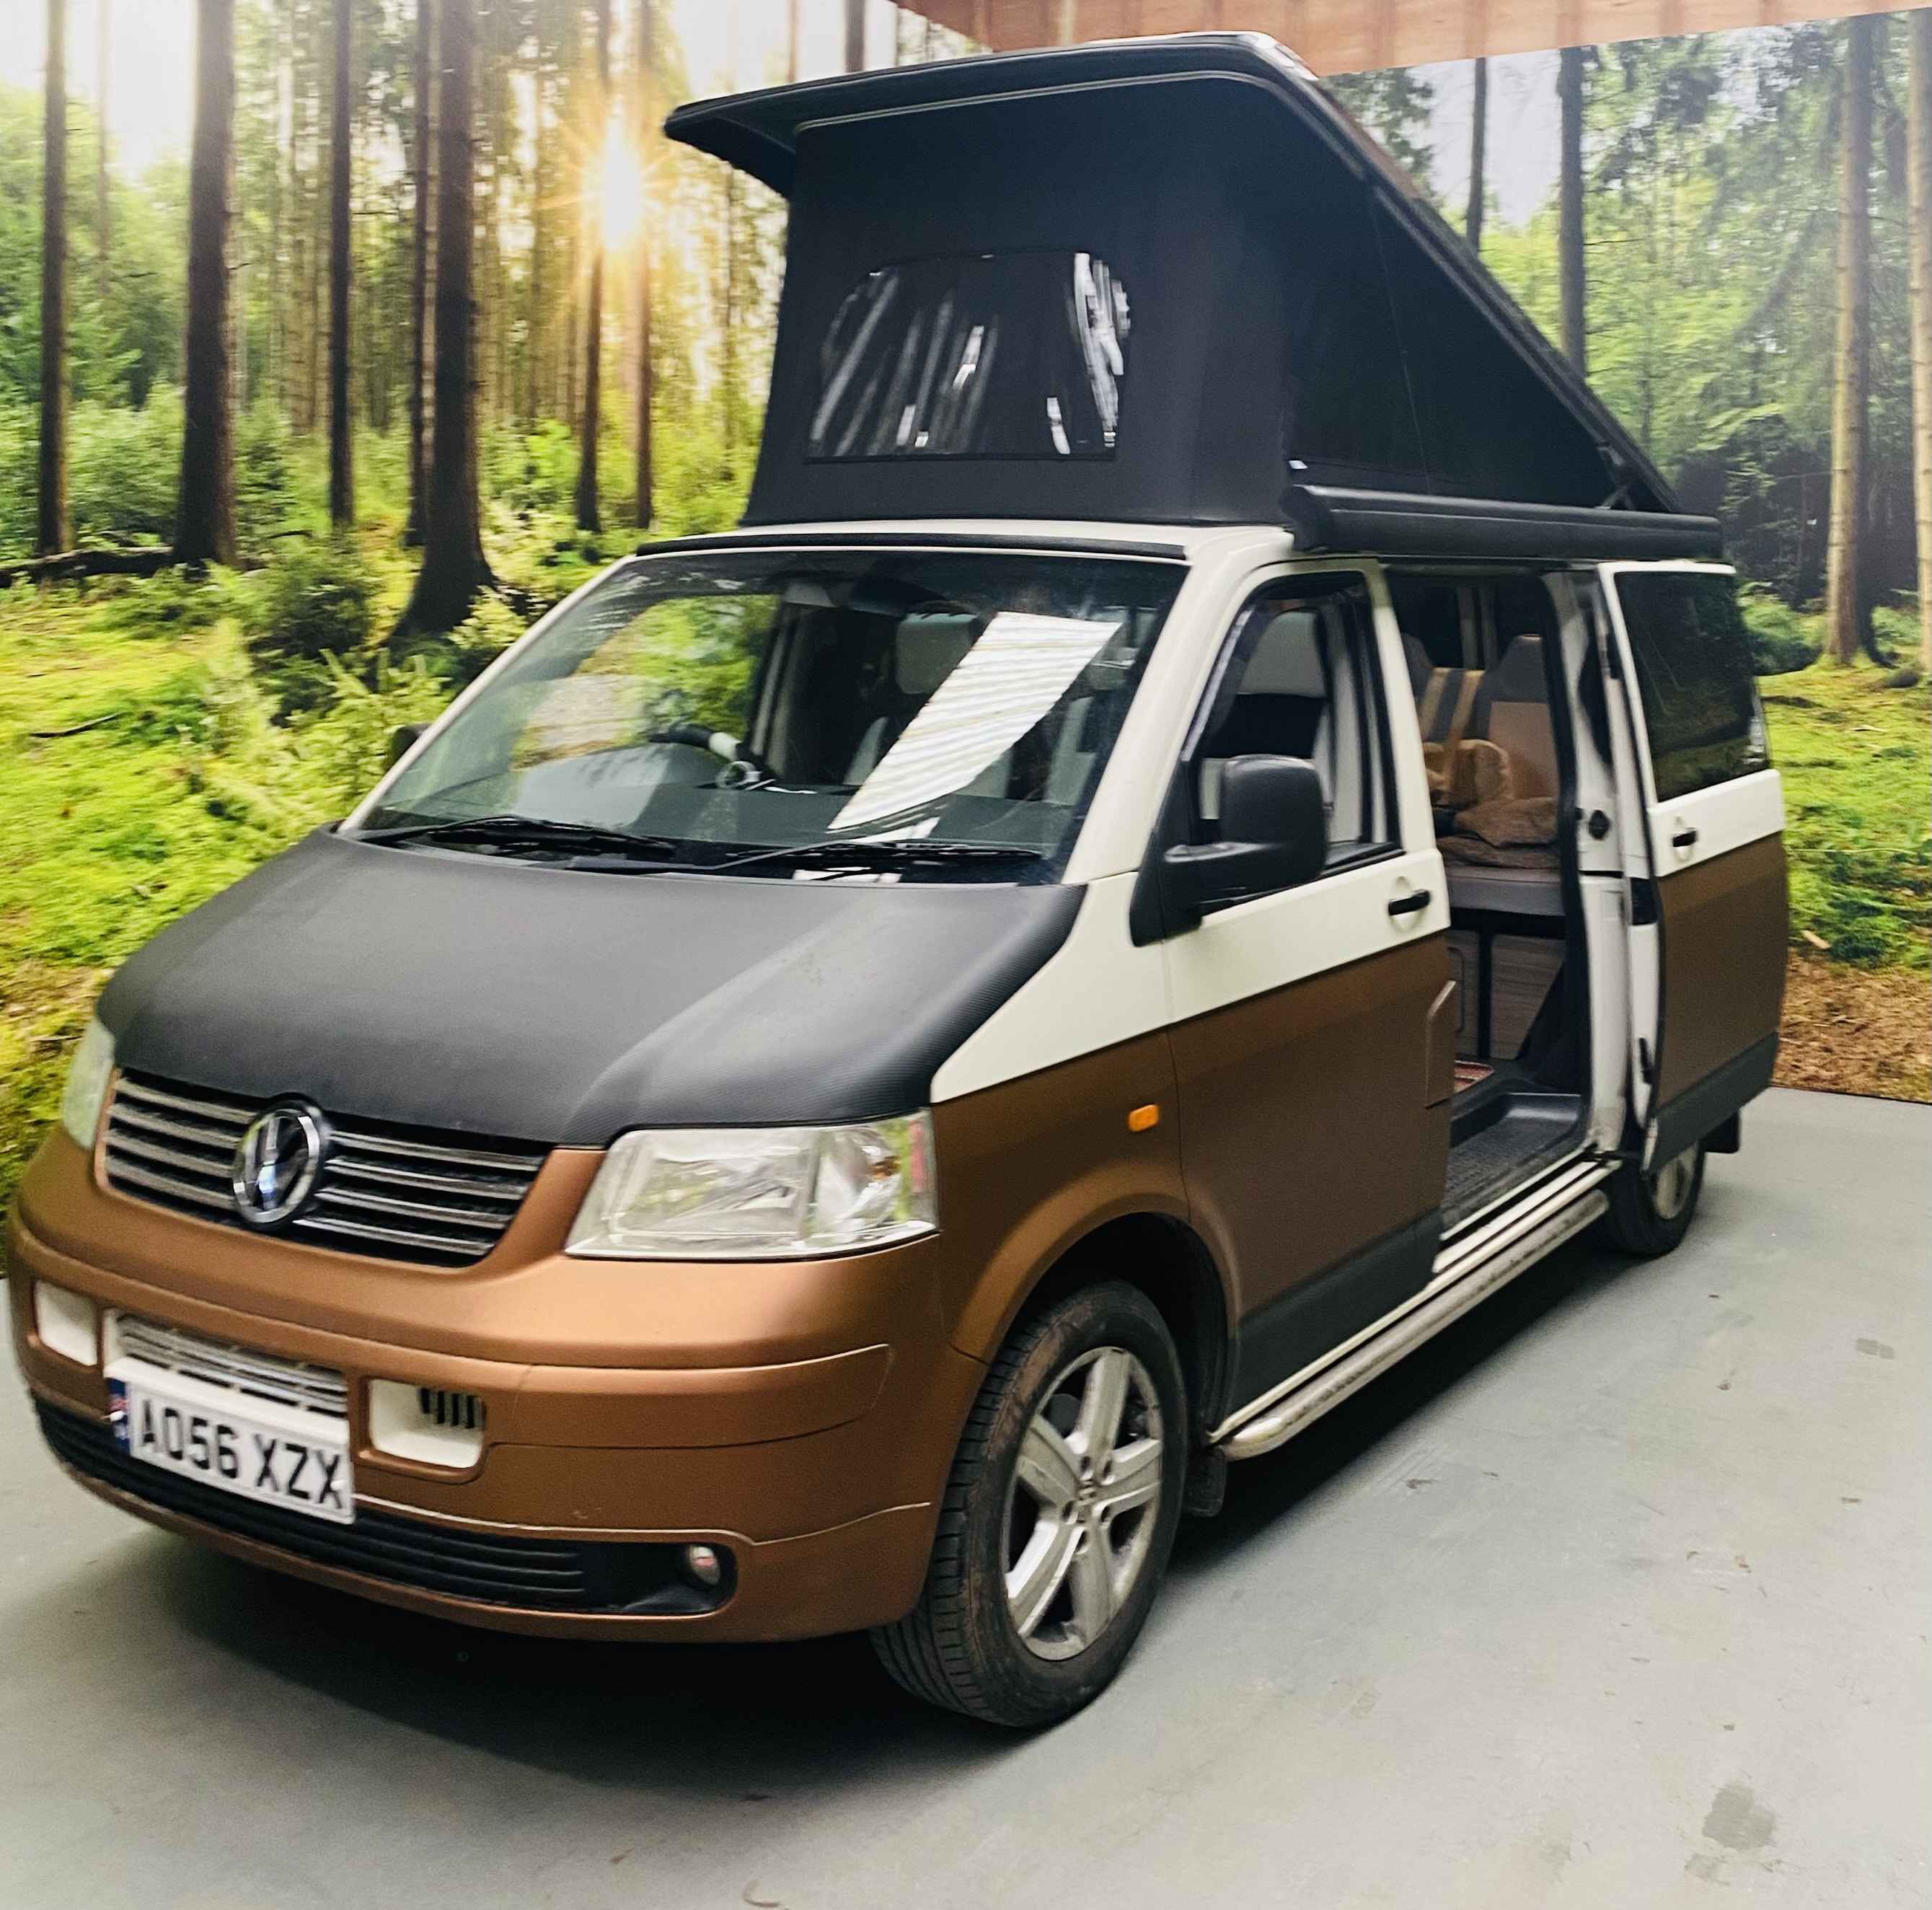 A VW T5 Campervan called Dolly and for hire in Ross-on-Wye, Herefordshire